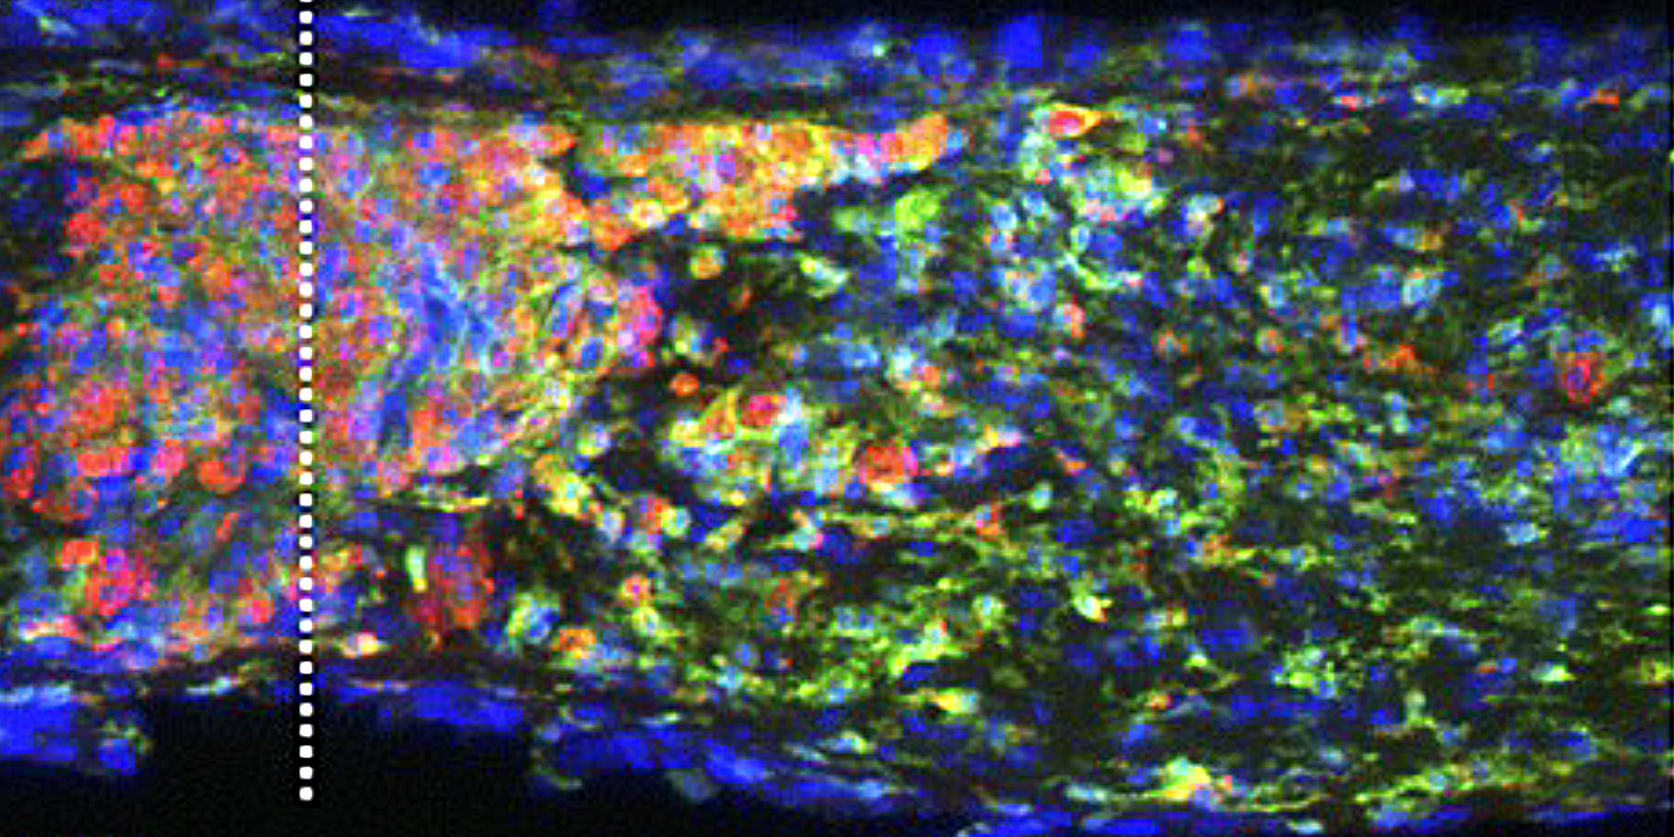 A colorful rendering of inflammation and regeneration at the cell level.